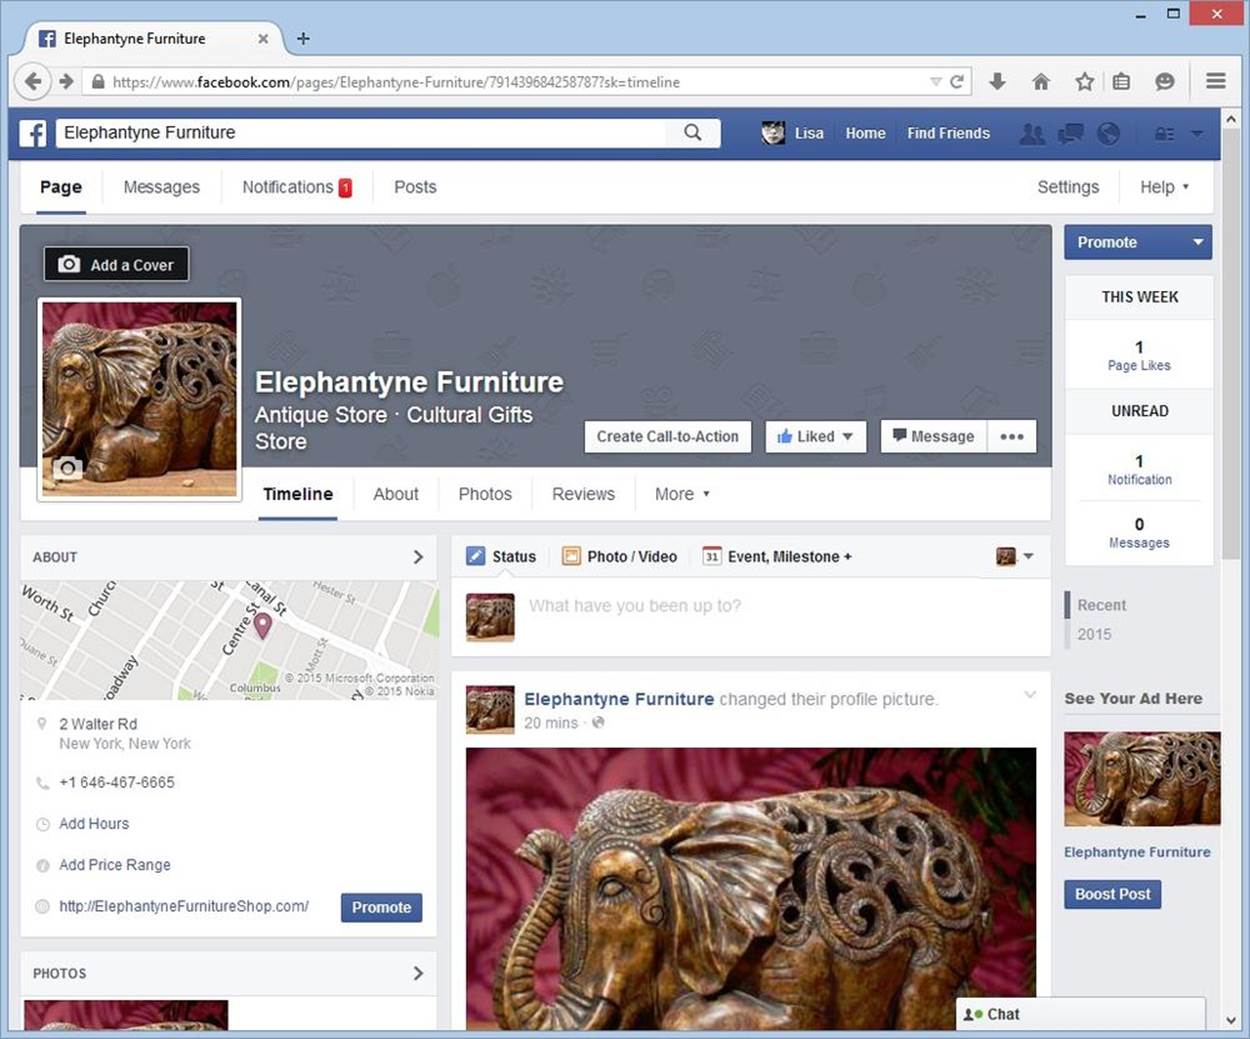 Here’s the freshly created Elephantyne Furniture page. It includes a timeline where you can add posts, the store’s contact information, a map, a tiled view of pictures, and a count of the Page’s likes